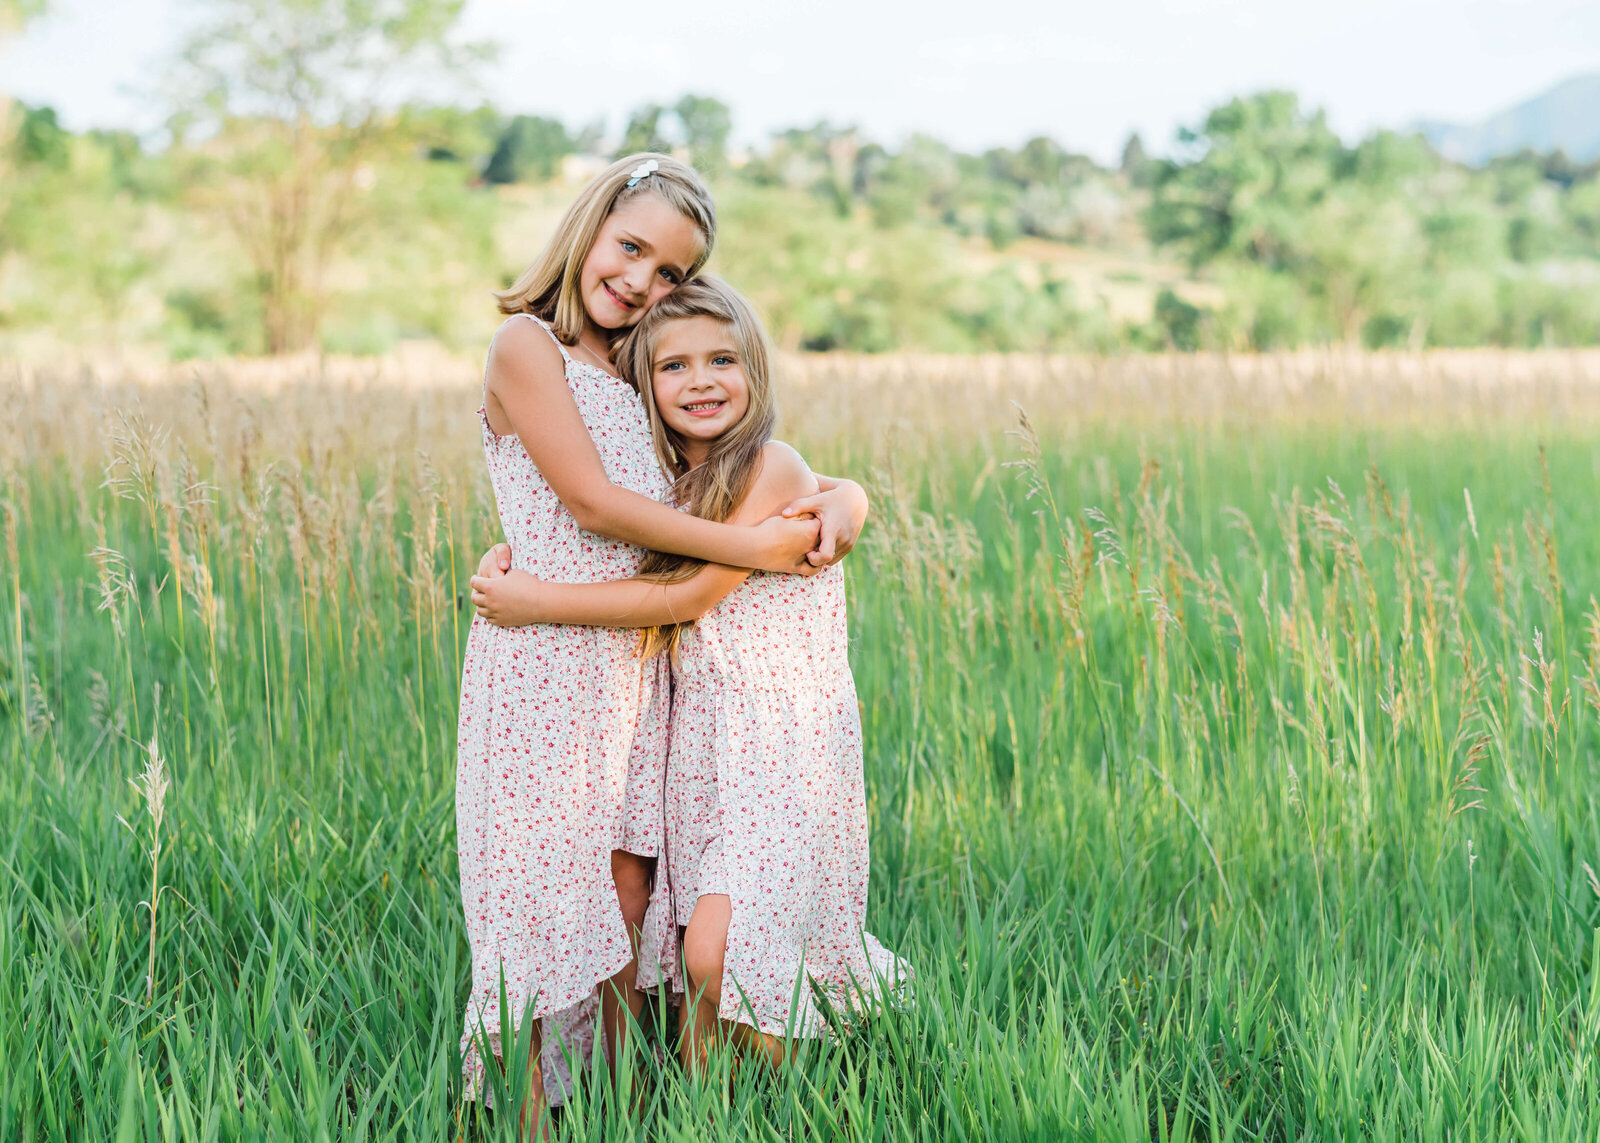 Two young blonde sisters in pink dresses hug each other while standing in a green field in an image by Northern Virginia family photographer